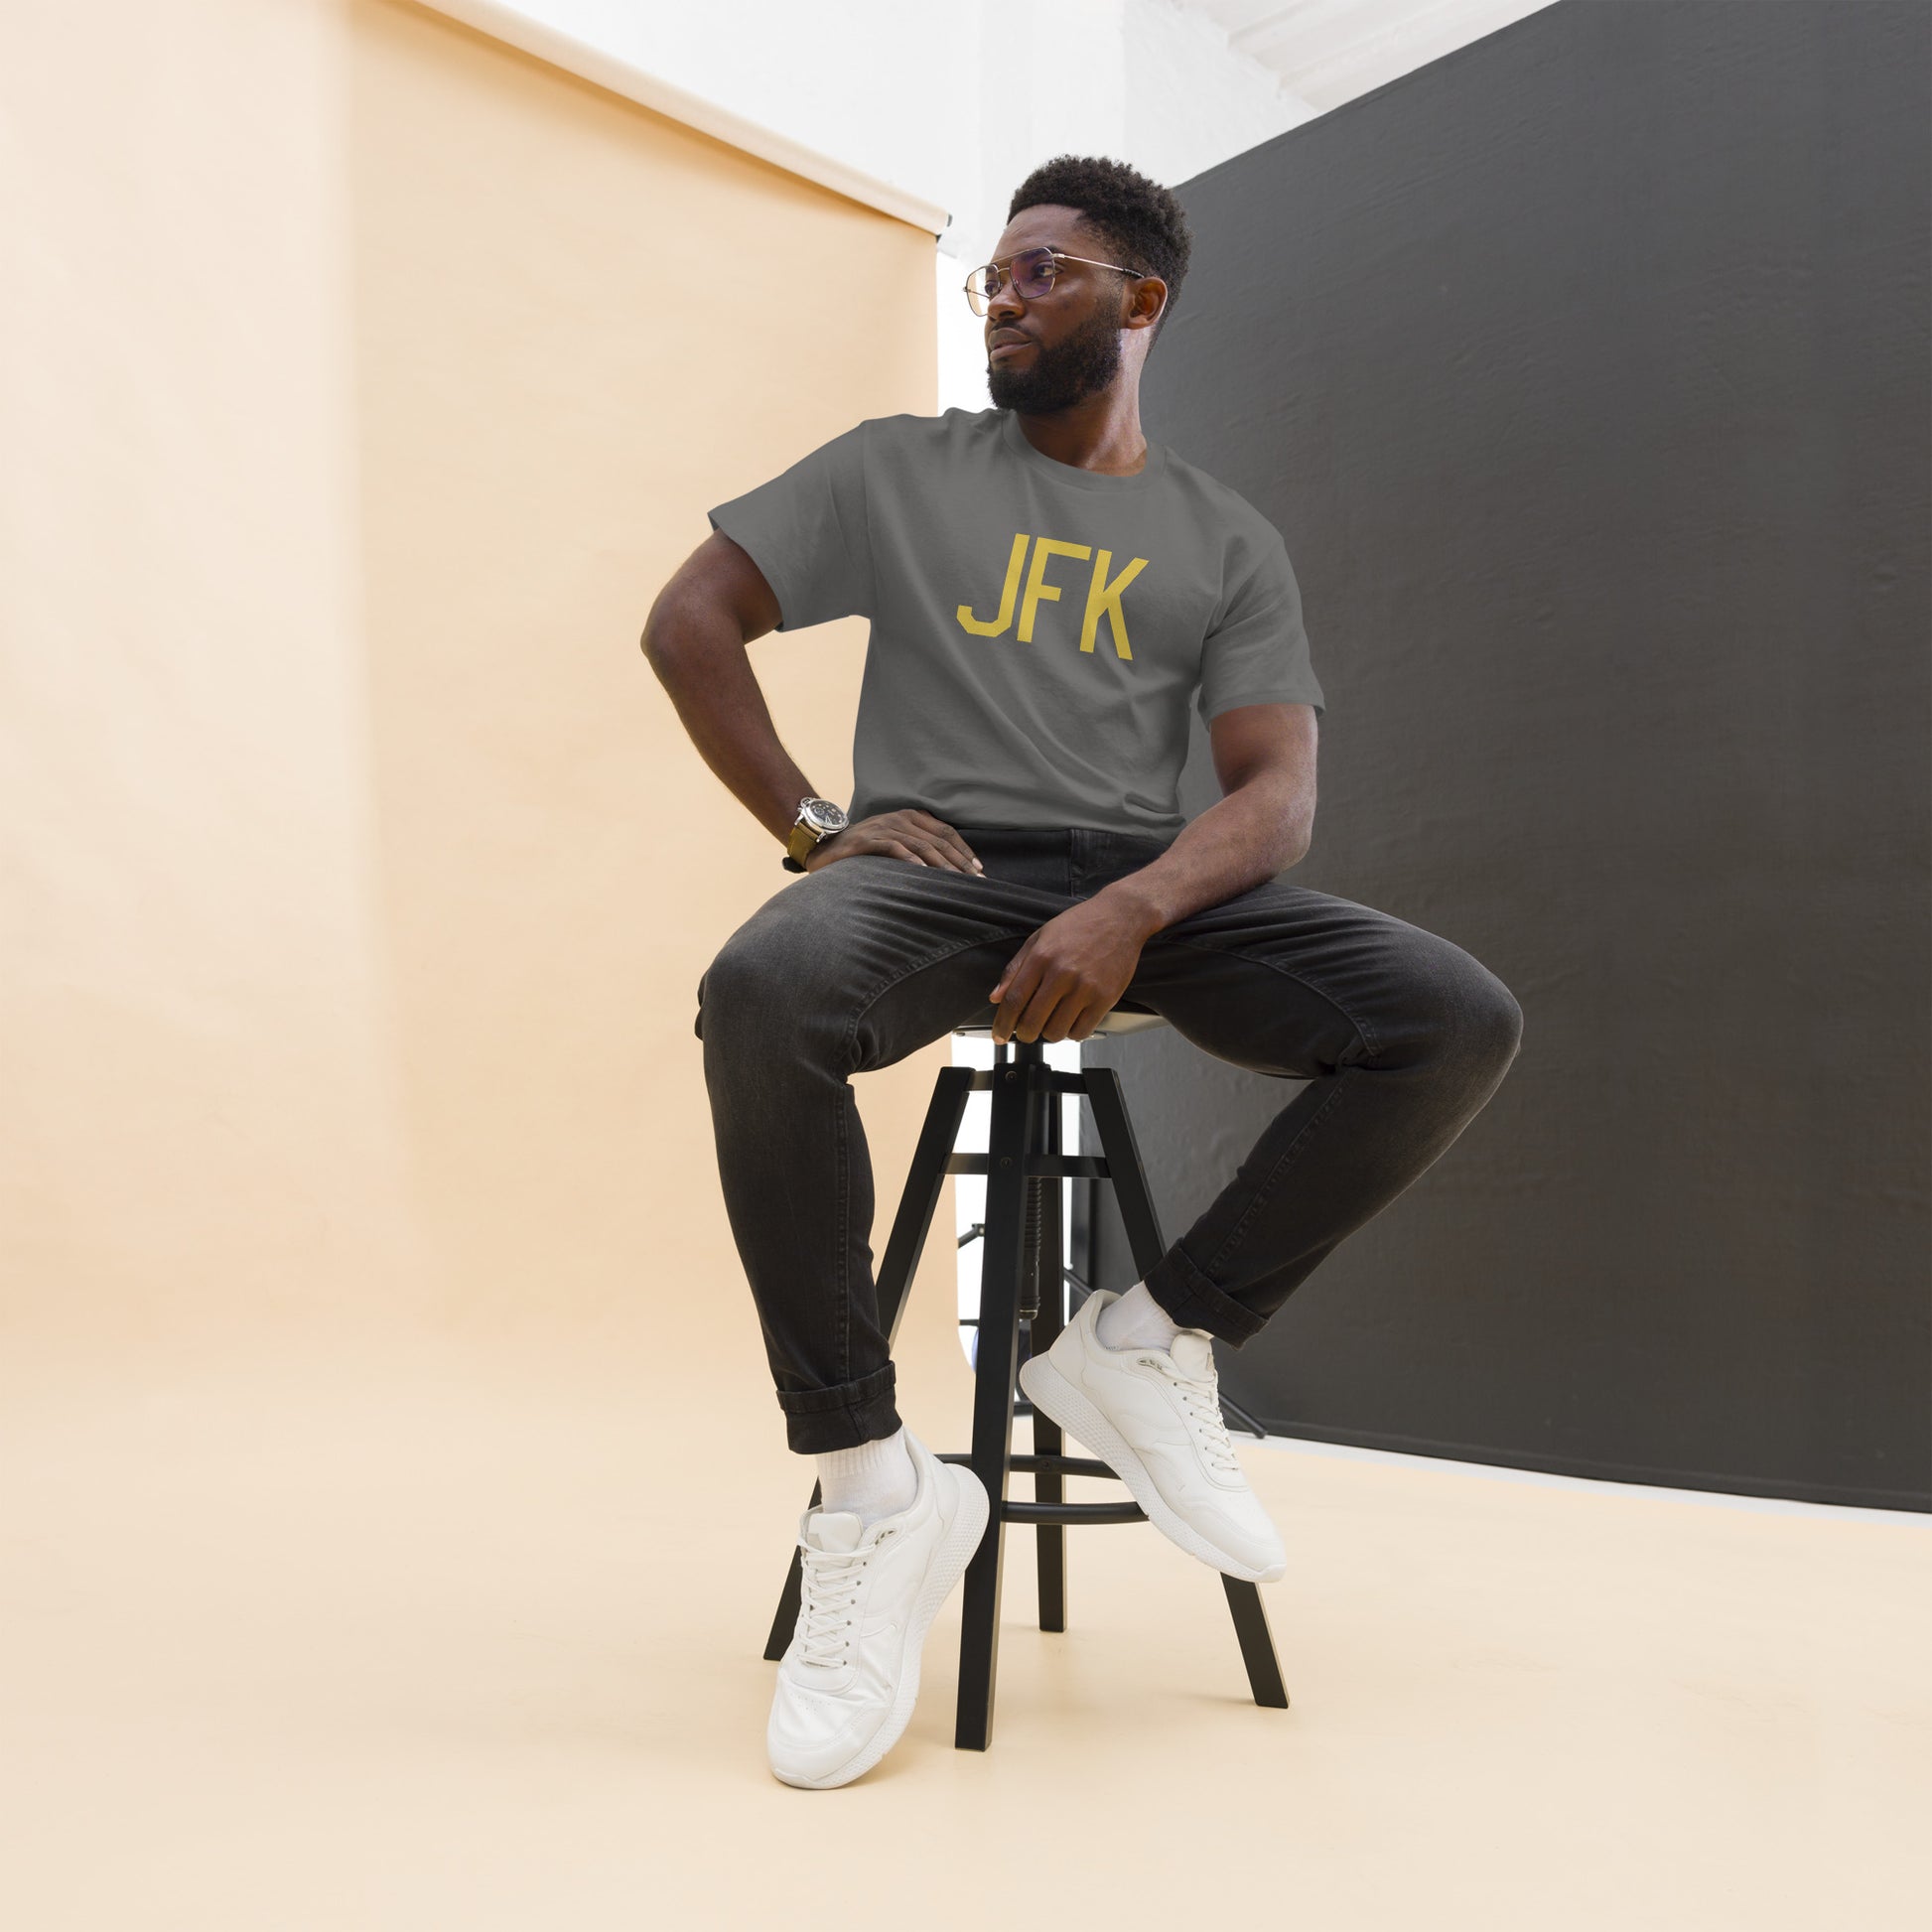 Aviation Enthusiast Men's Tee - Old Gold Graphic • JFK New York City • YHM Designs - Image 04